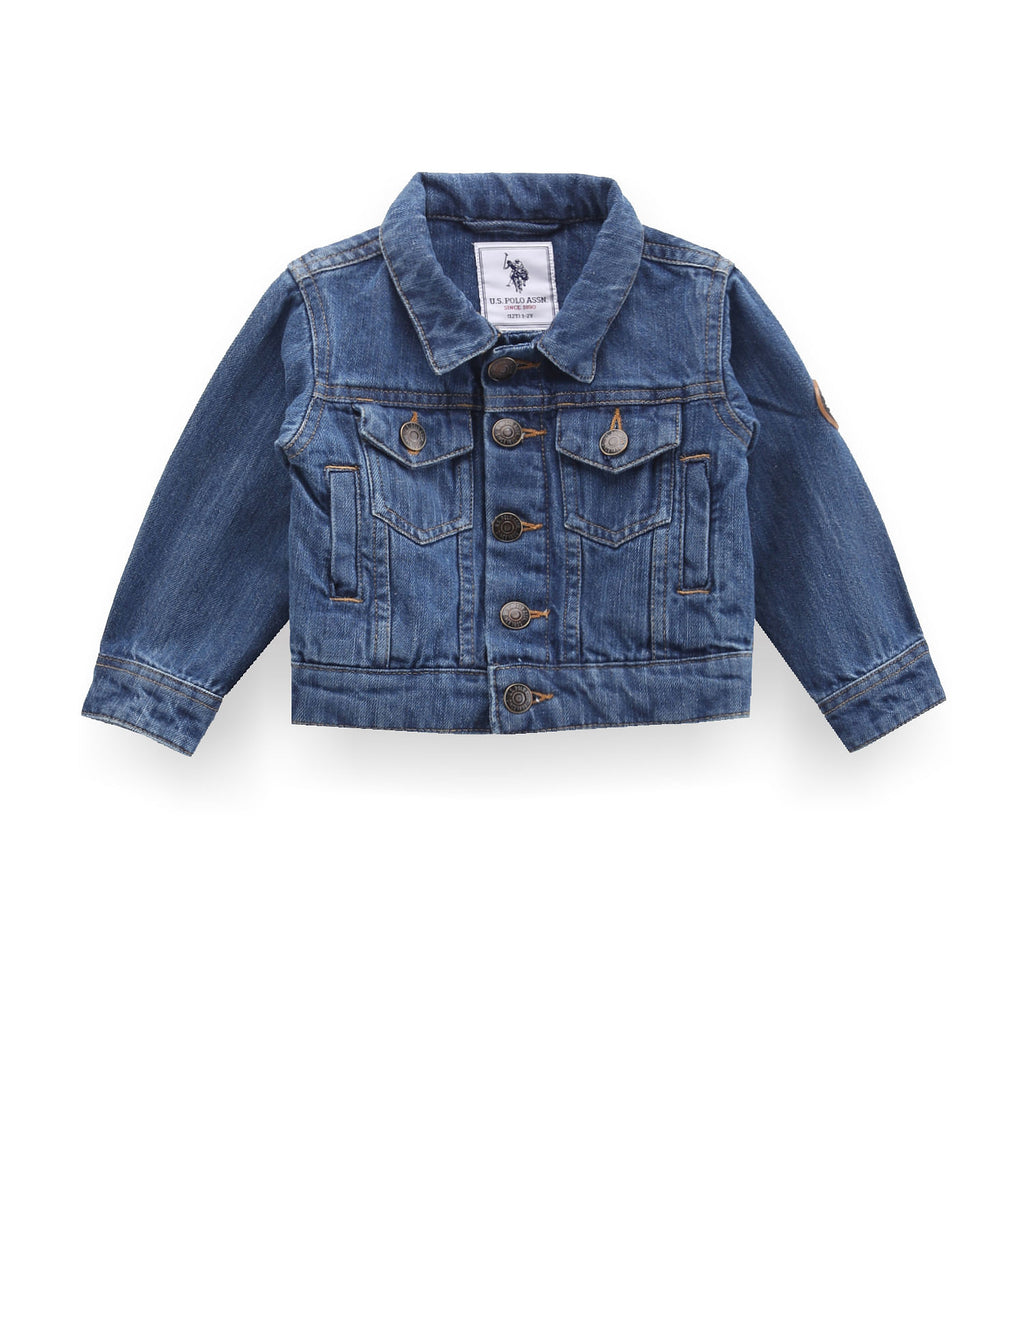 Buy Abolai Baby Boys' Basic Denim Jacket Hoodie Button Down Jeans Jacket  Top, Style2 Blue, 3T at Amazon.in